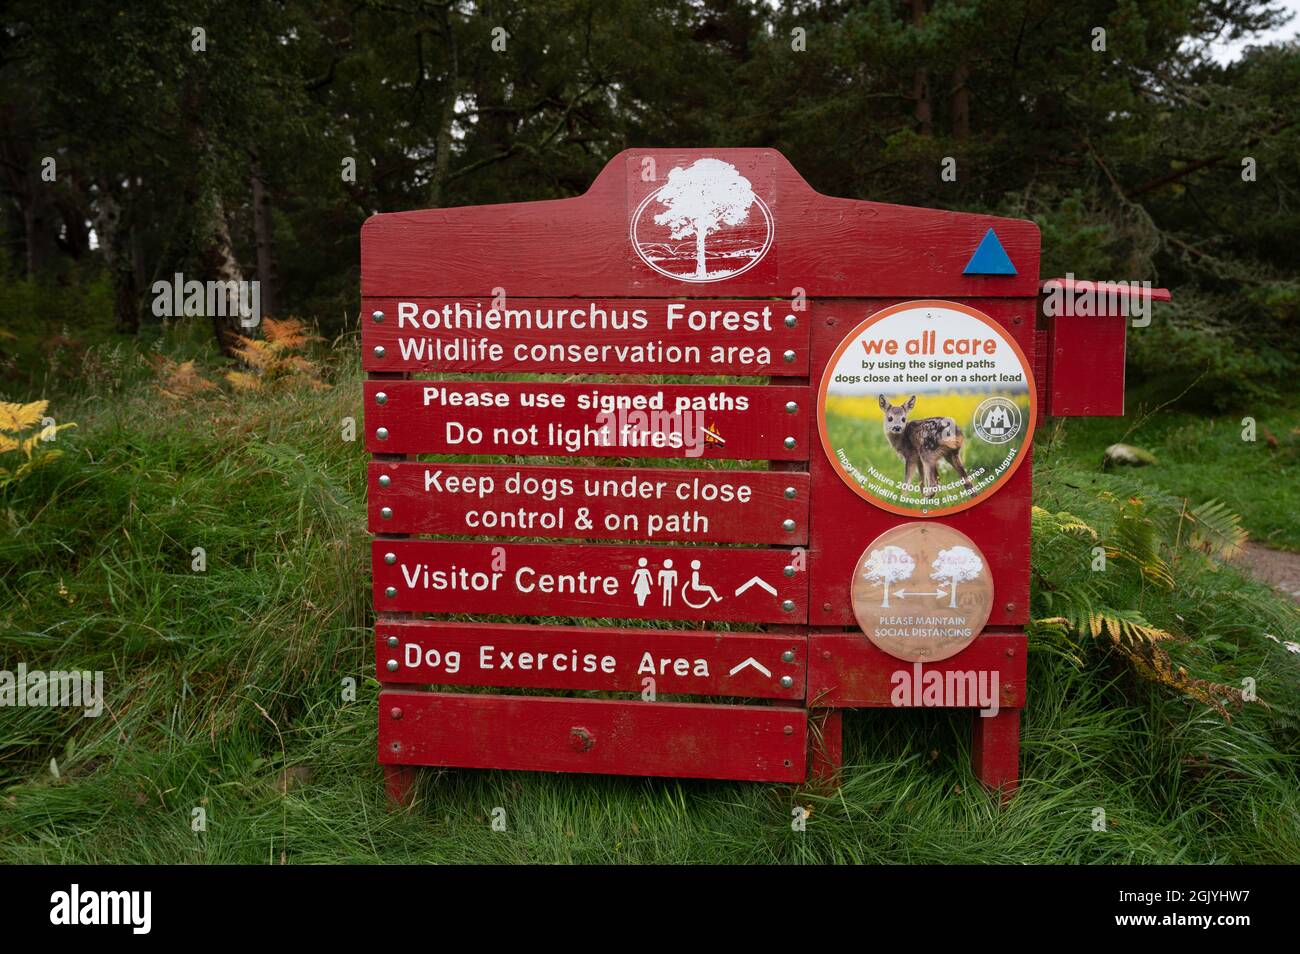 Red and white sign for Rothiemurchus Forest with arrows to visitor centre, dog exercise area. Blurred forest background. Rules about fires and dogs. Stock Photo